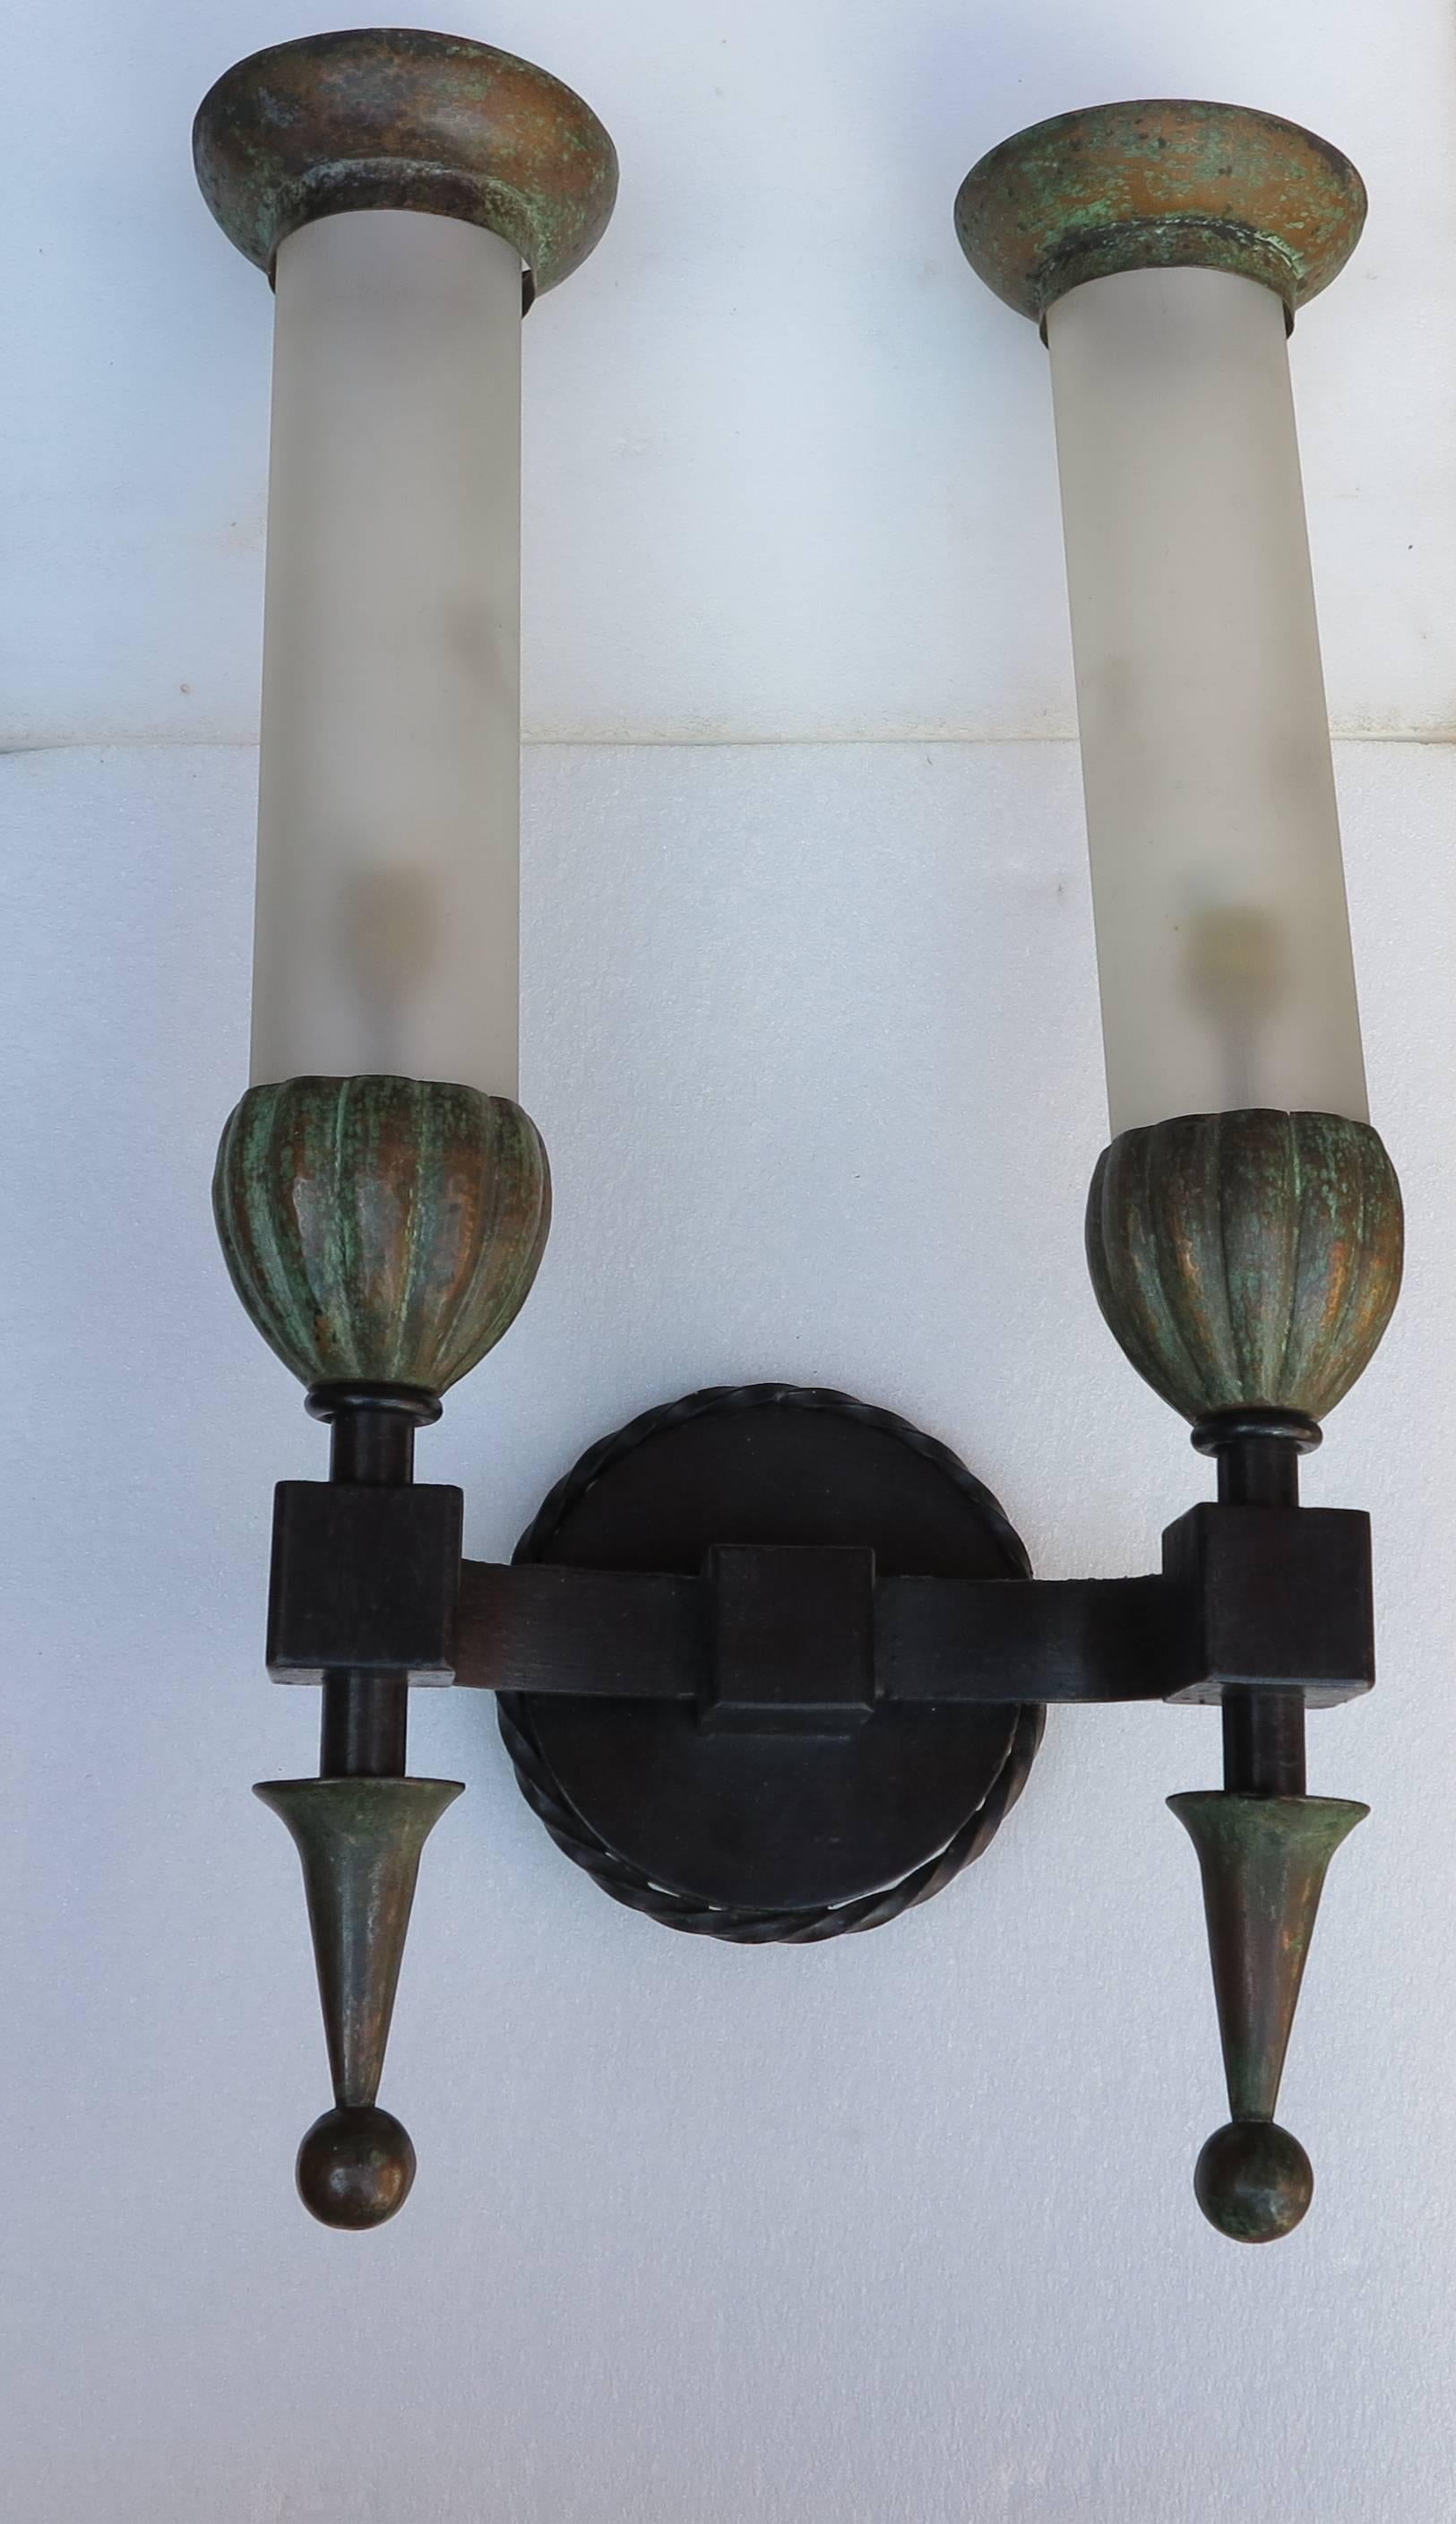 Art Deco 1950s Sconces Pair in the Style of Poillerat Iron and Copper and Sanded Glasses